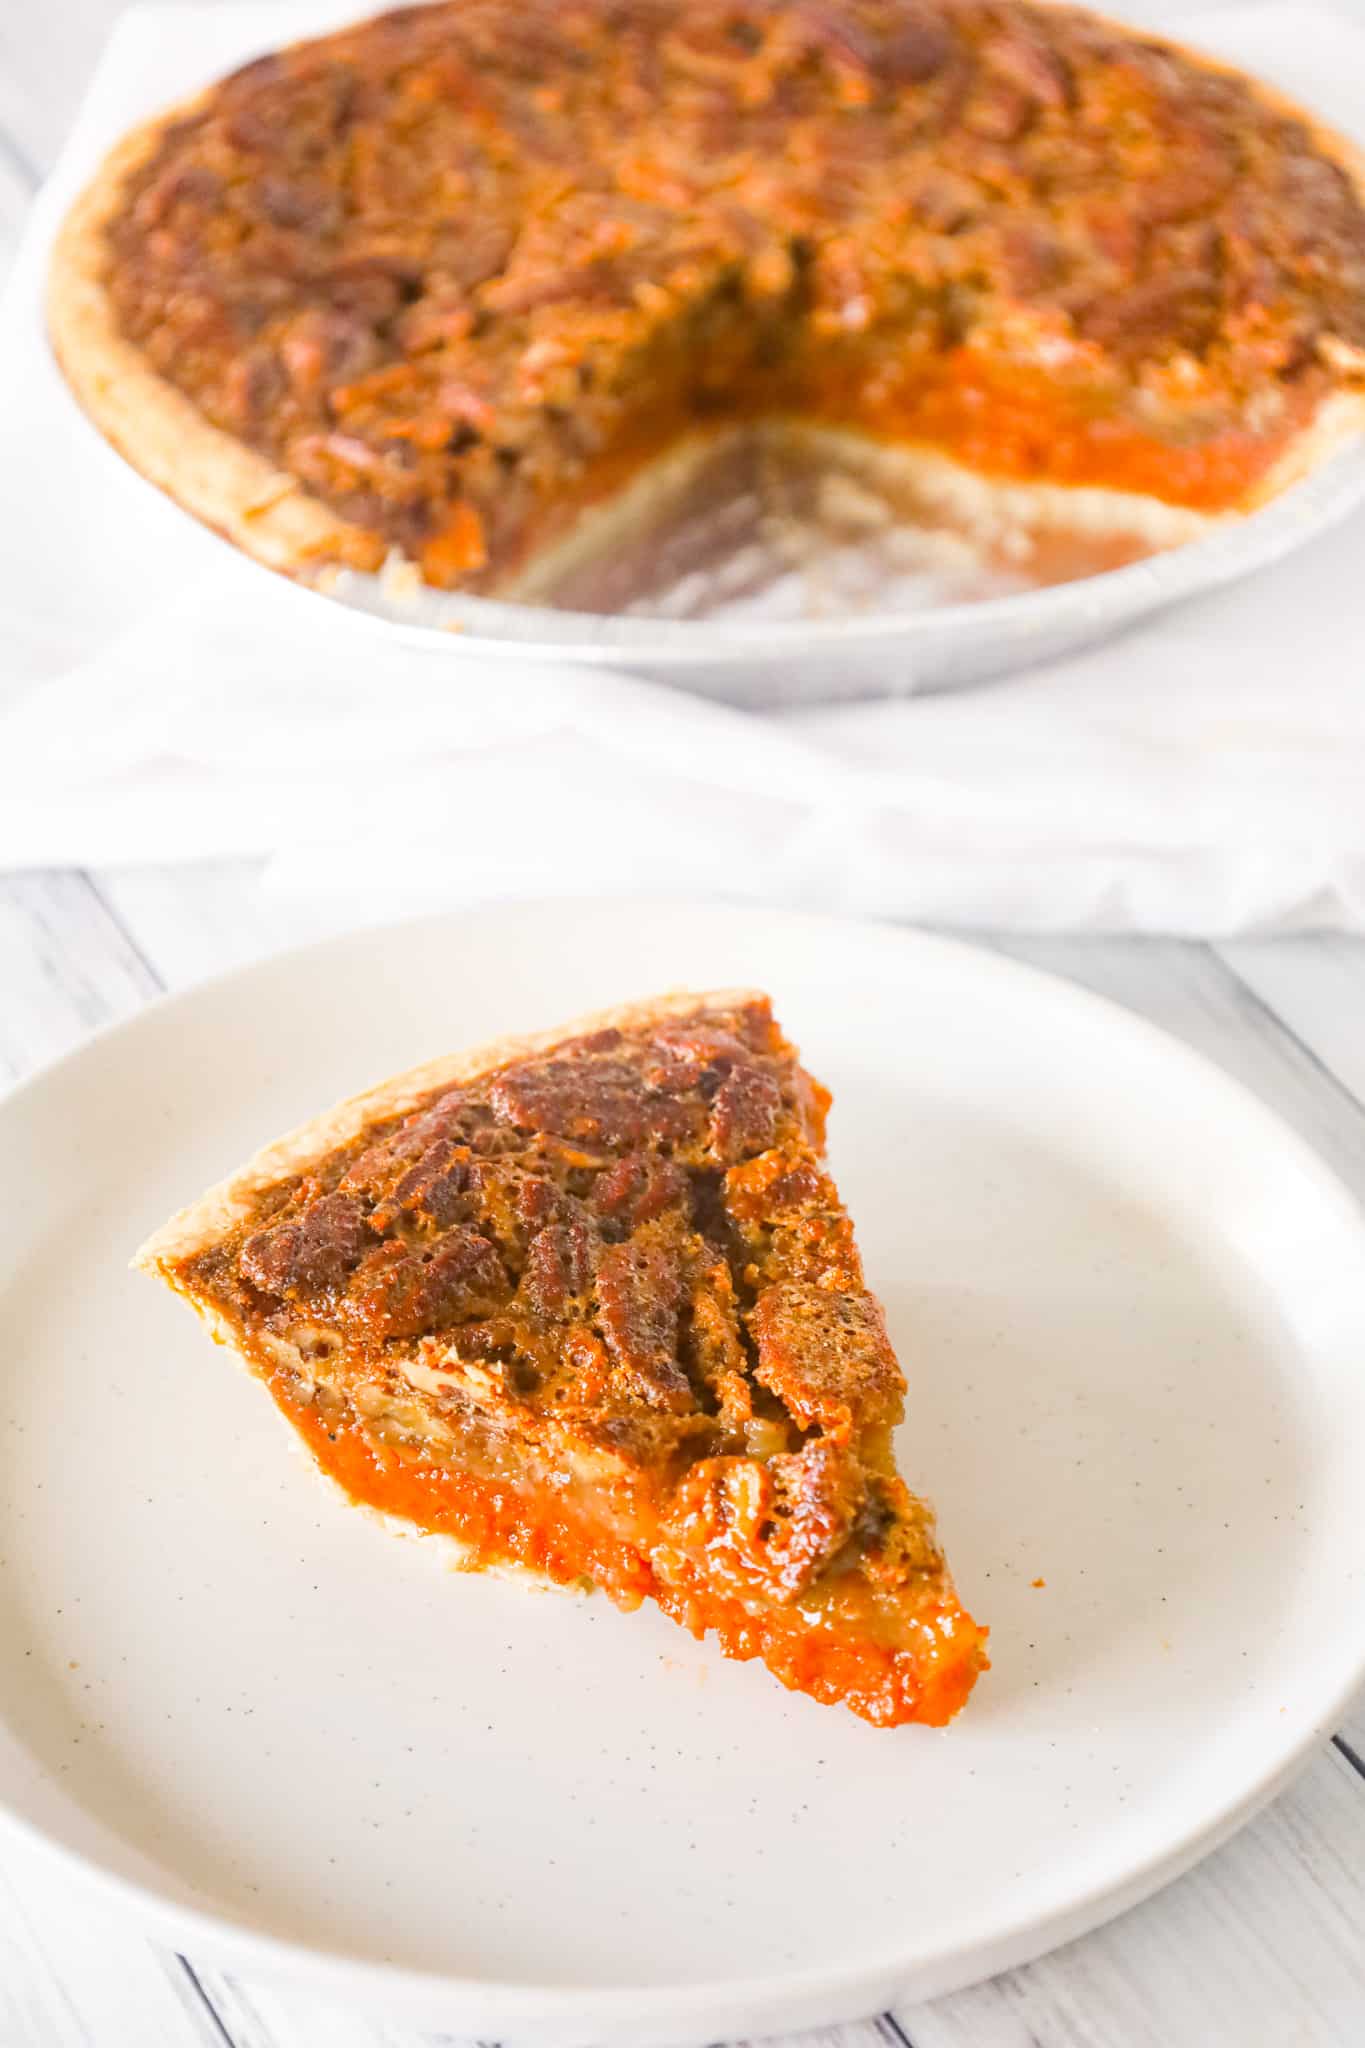 Pumpkin Pecan Pie is a delicious dessert recipe using a store bought pie crust with a layer of spiced pumpkin and topped with a gooey pecan mixture.